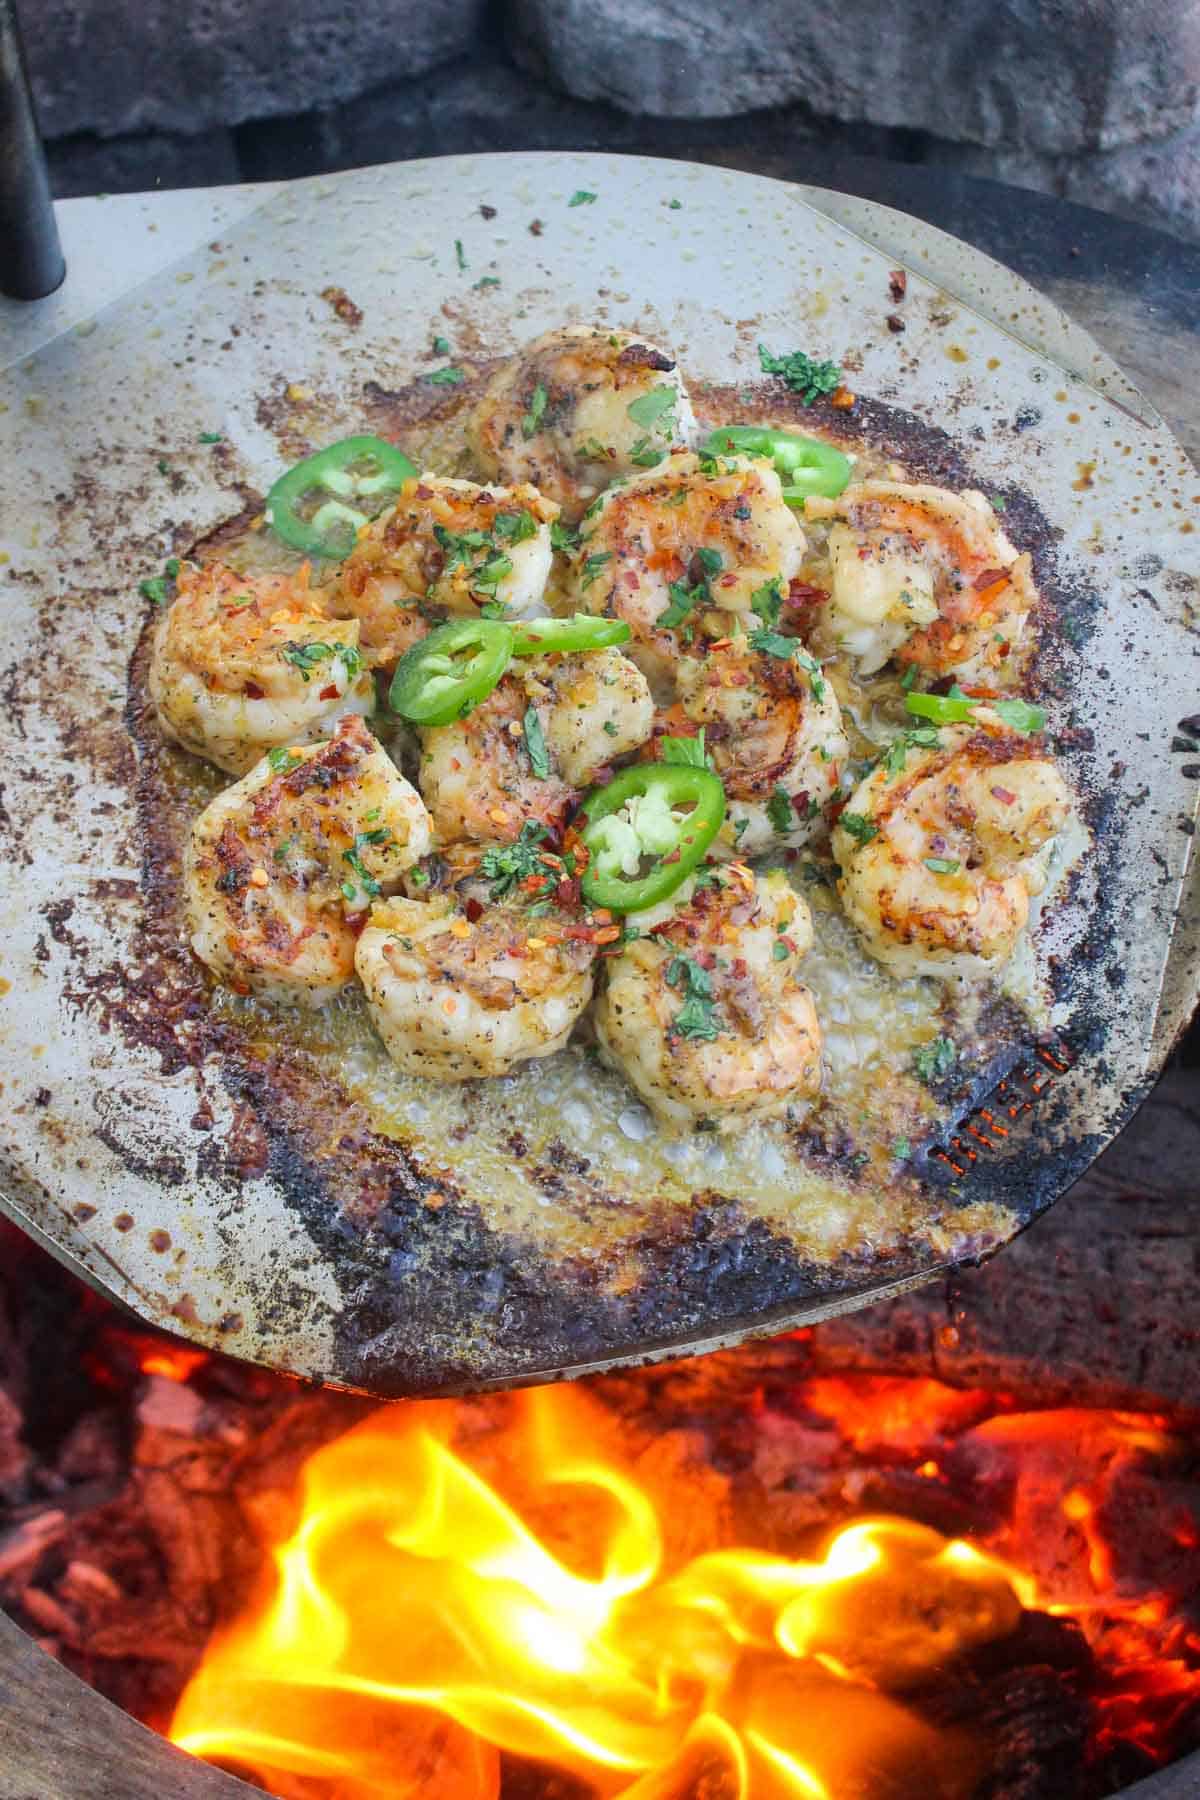 The tequila lime shrimp being roasted on the sear plate over the flames. 